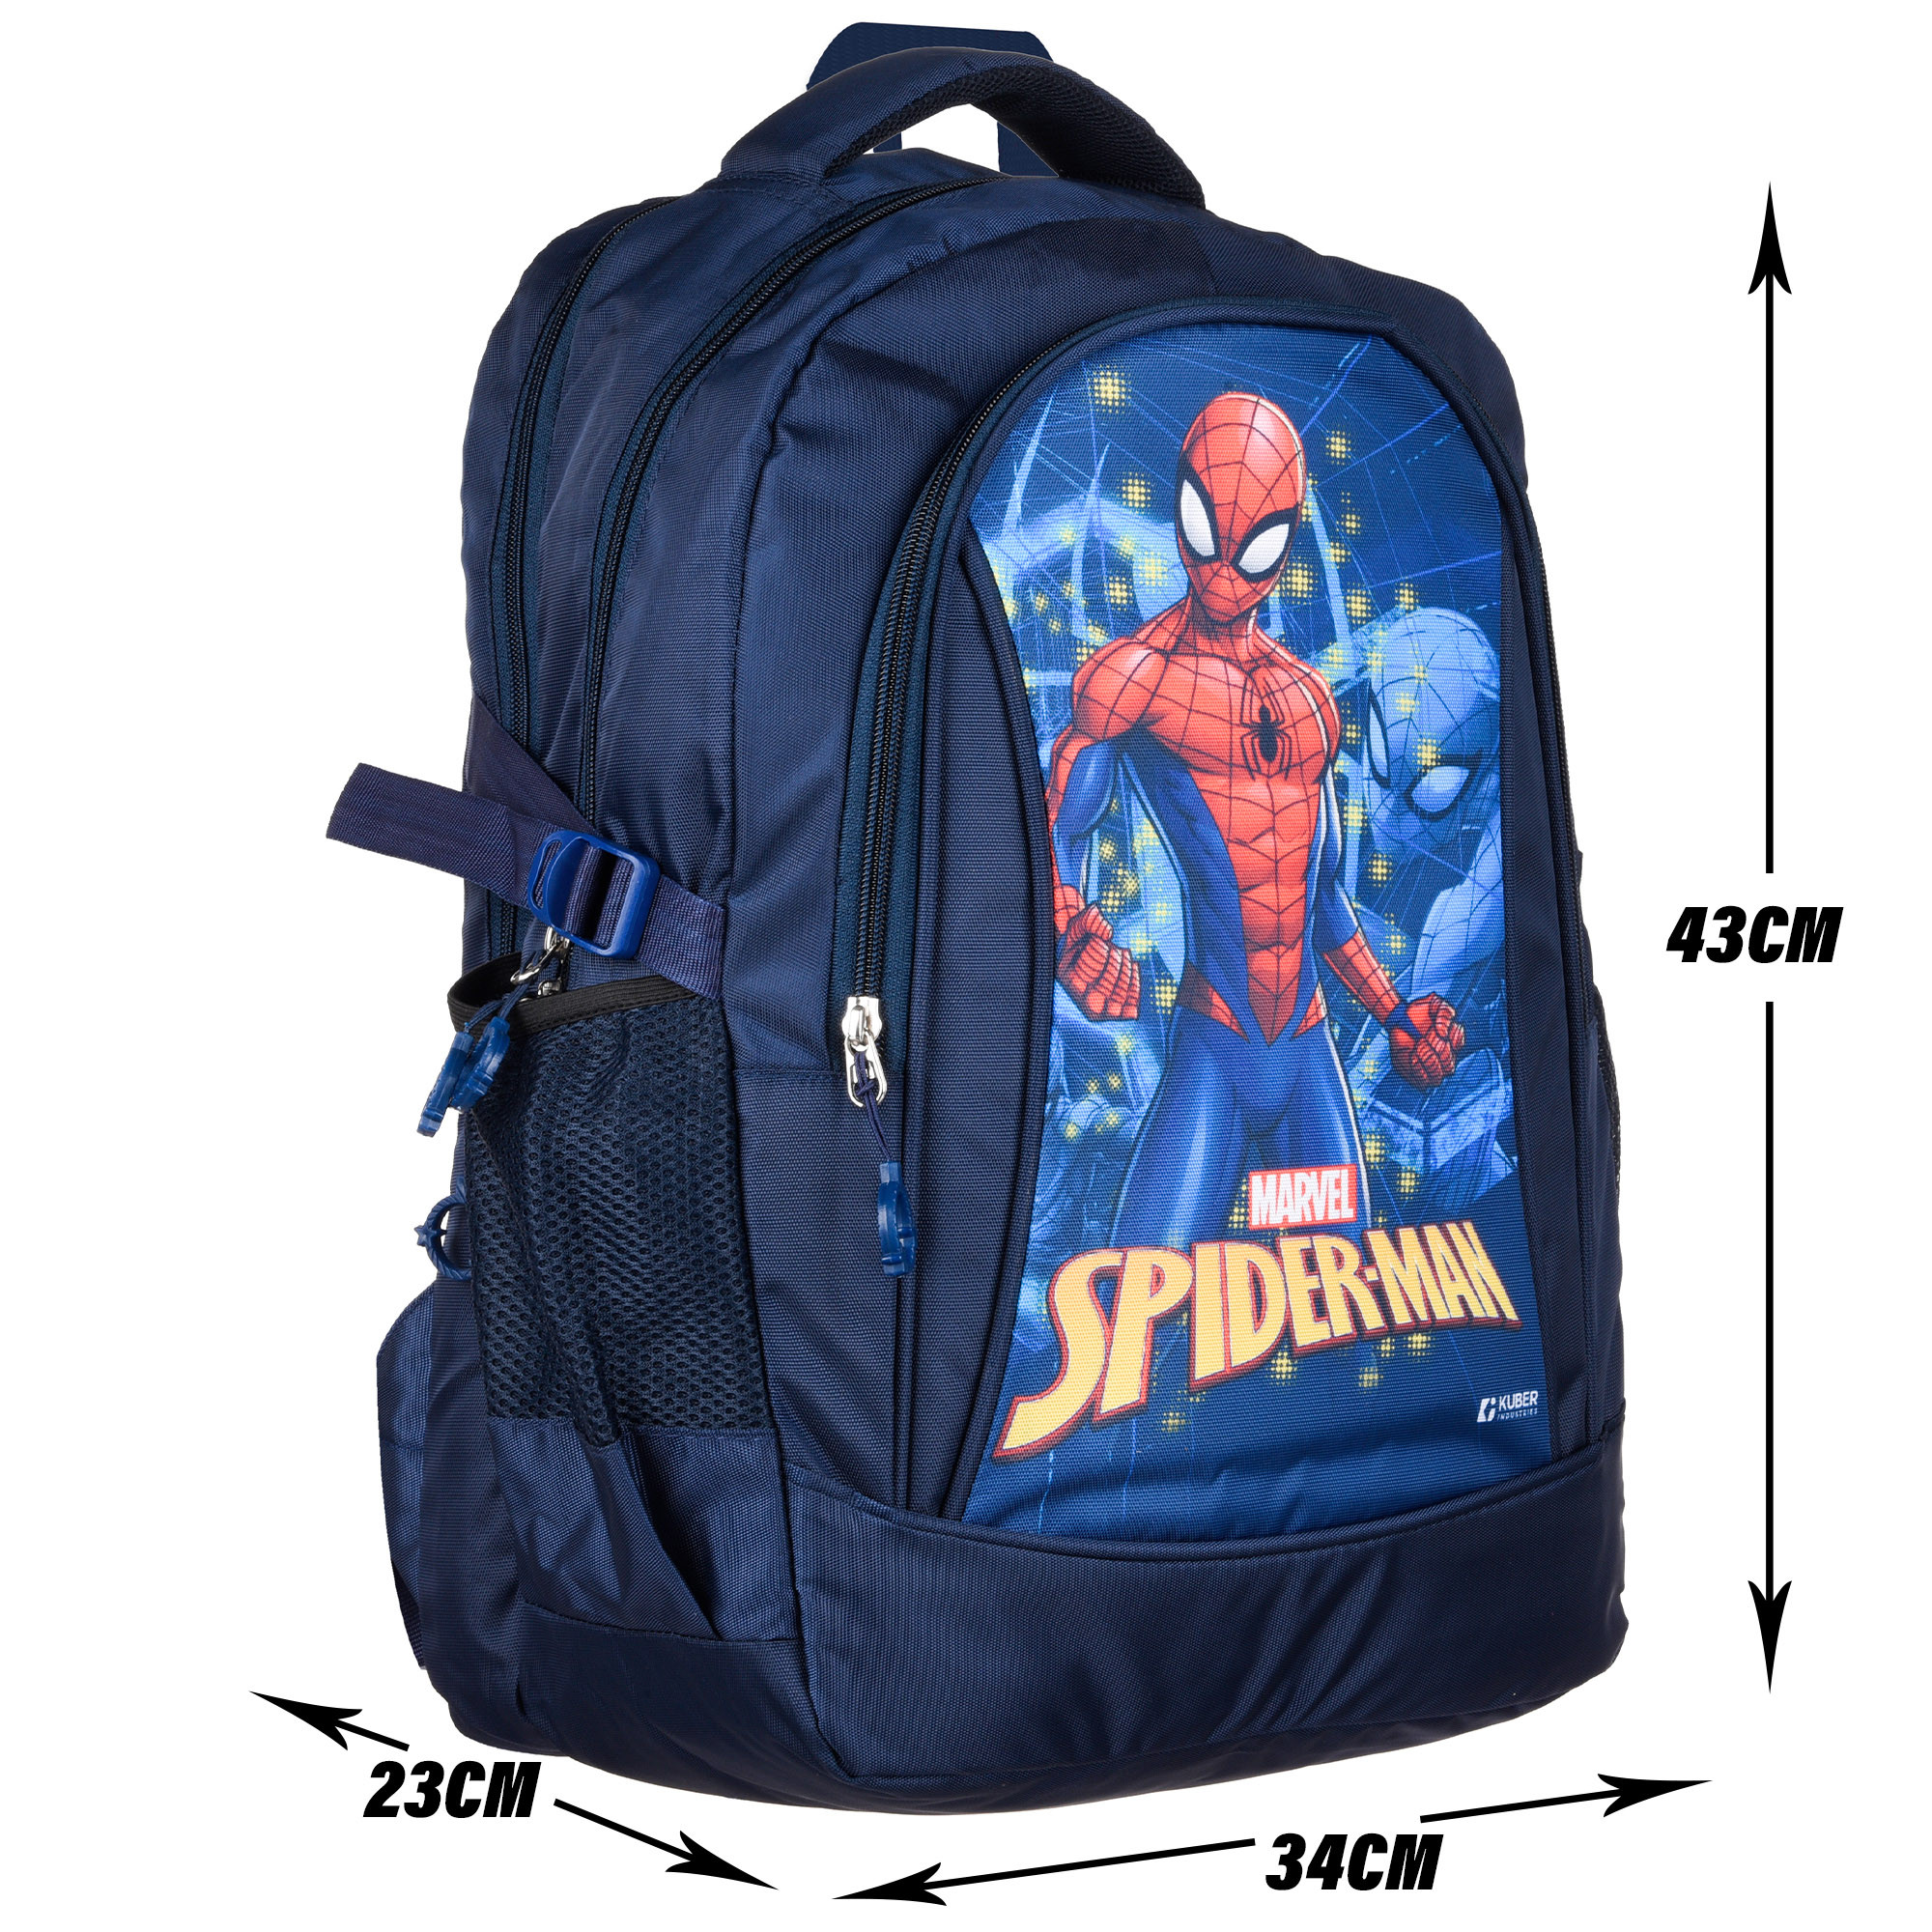 Kuber Industries Marvel The Spider-Man School Bags | Kids School Bags | Student Bookbag | Travel Backpack | School Bag for Girls & Boys | School Bag with 3 Compartments | Navy Blue